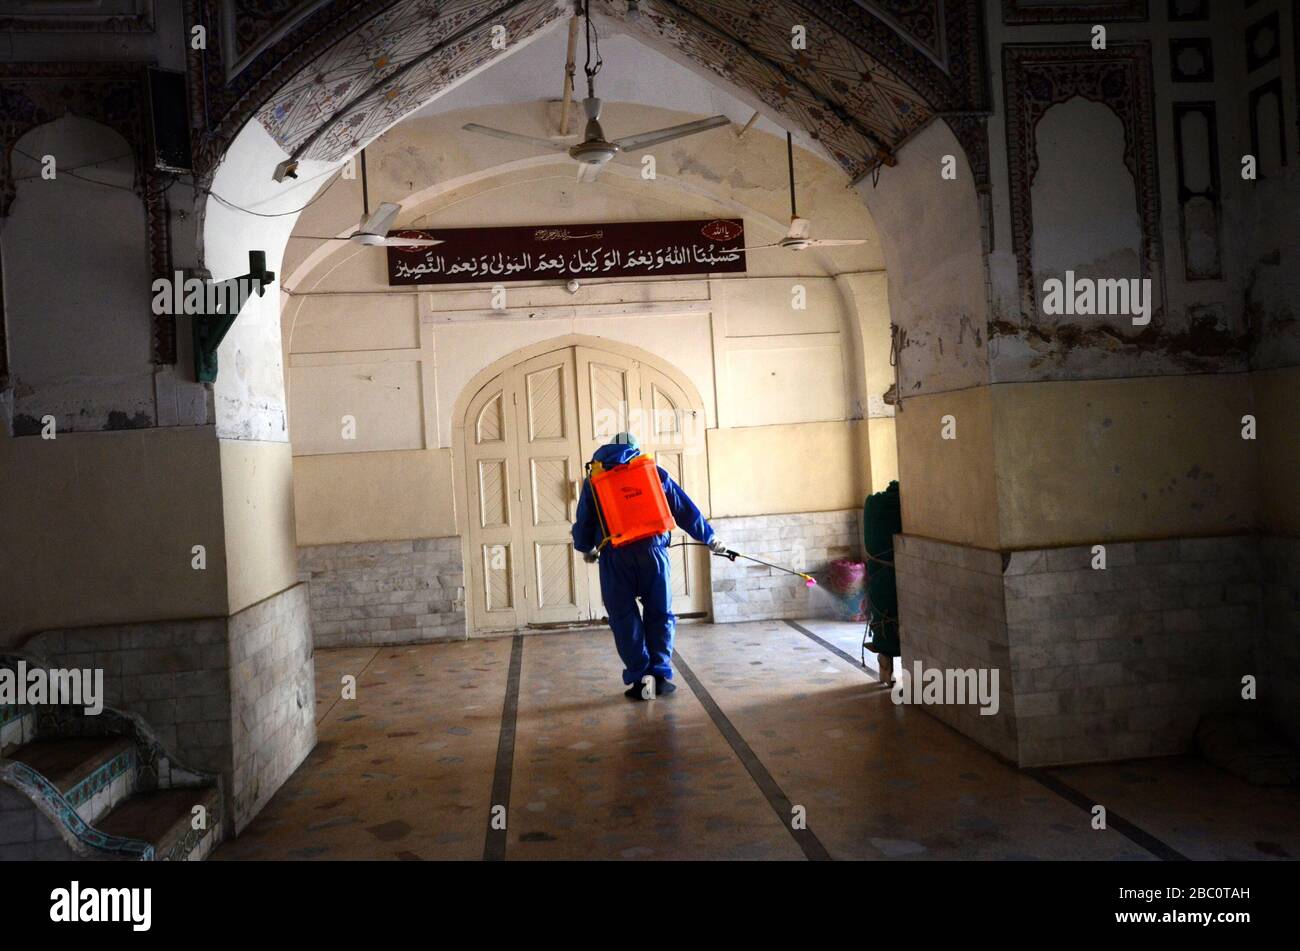 Municipal corporation team members spray disinfectant to sanitize the surroundings of the Dilawar Khan Mosque and street following an outbreak of the corona virus in the city of Peshawar, Pakistan on April 2, 2020. (Photo by Hussain Ali/Pacific Press/Sipa USA) Stock Photo